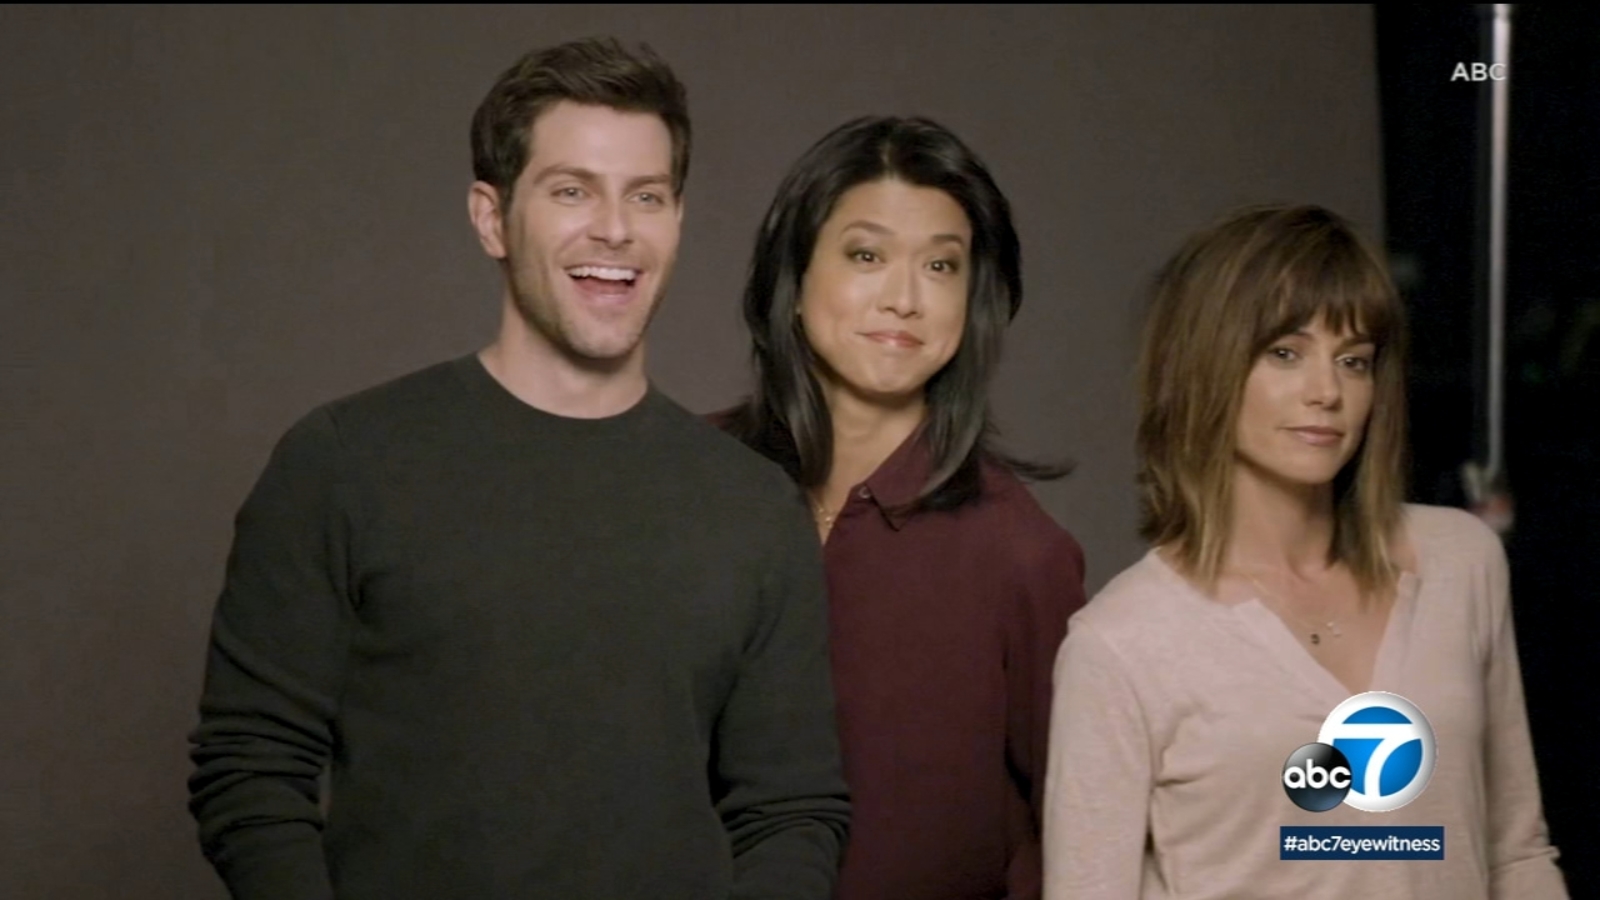 David Giuntoli has 'A Million Little Things' to love about working on ABC drama